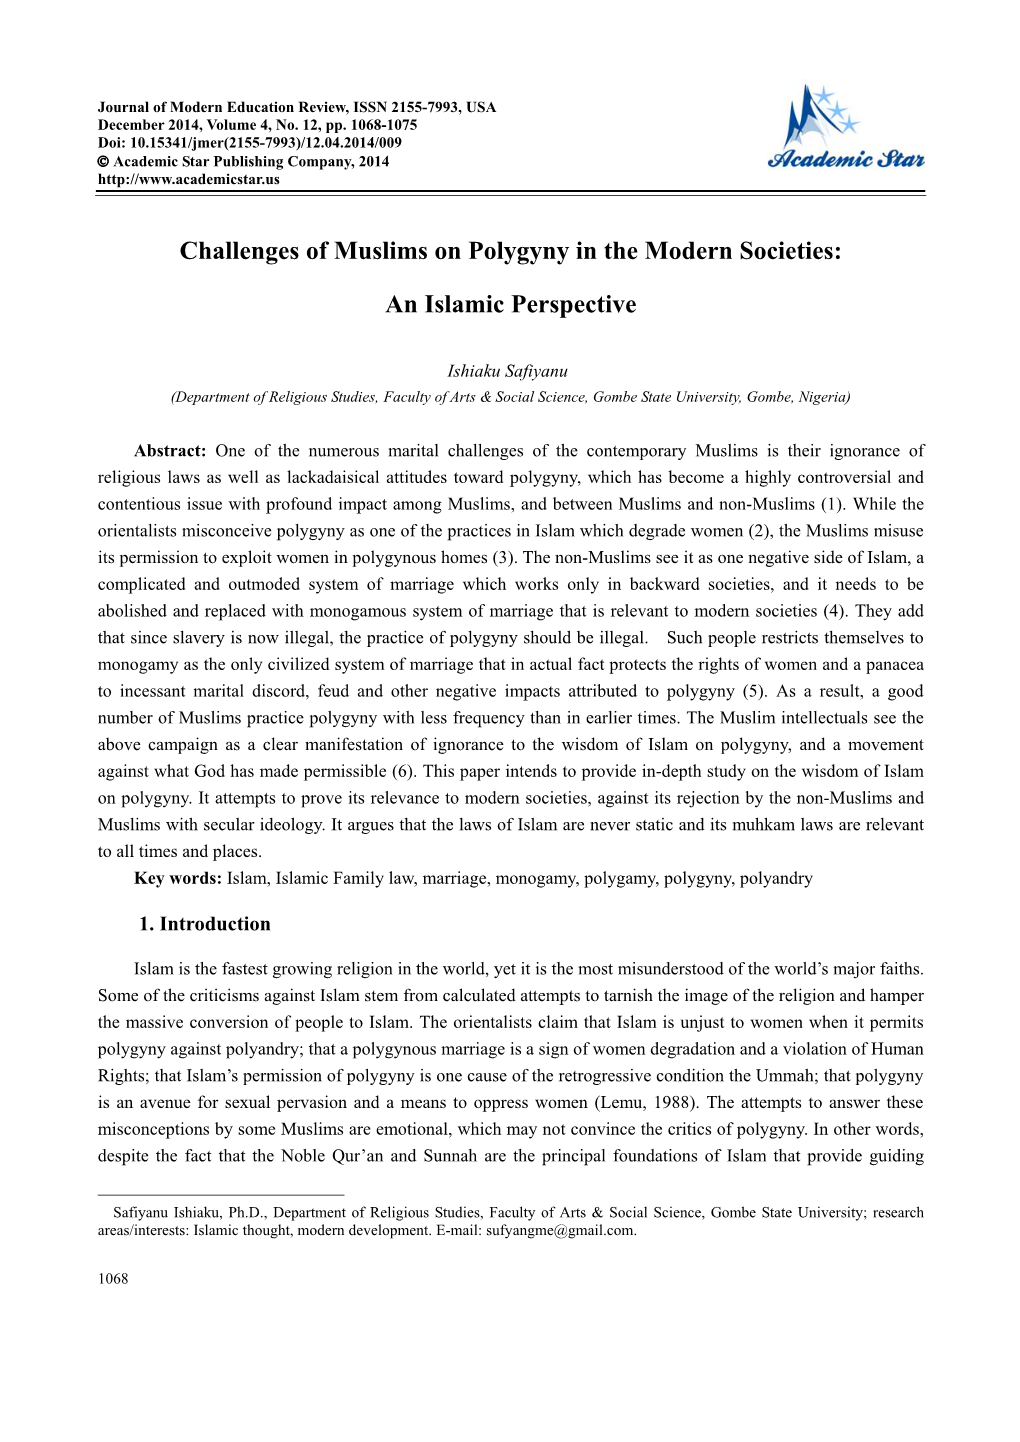 Challenges of Muslims on Polygyny in the Modern Societies: an Islamic